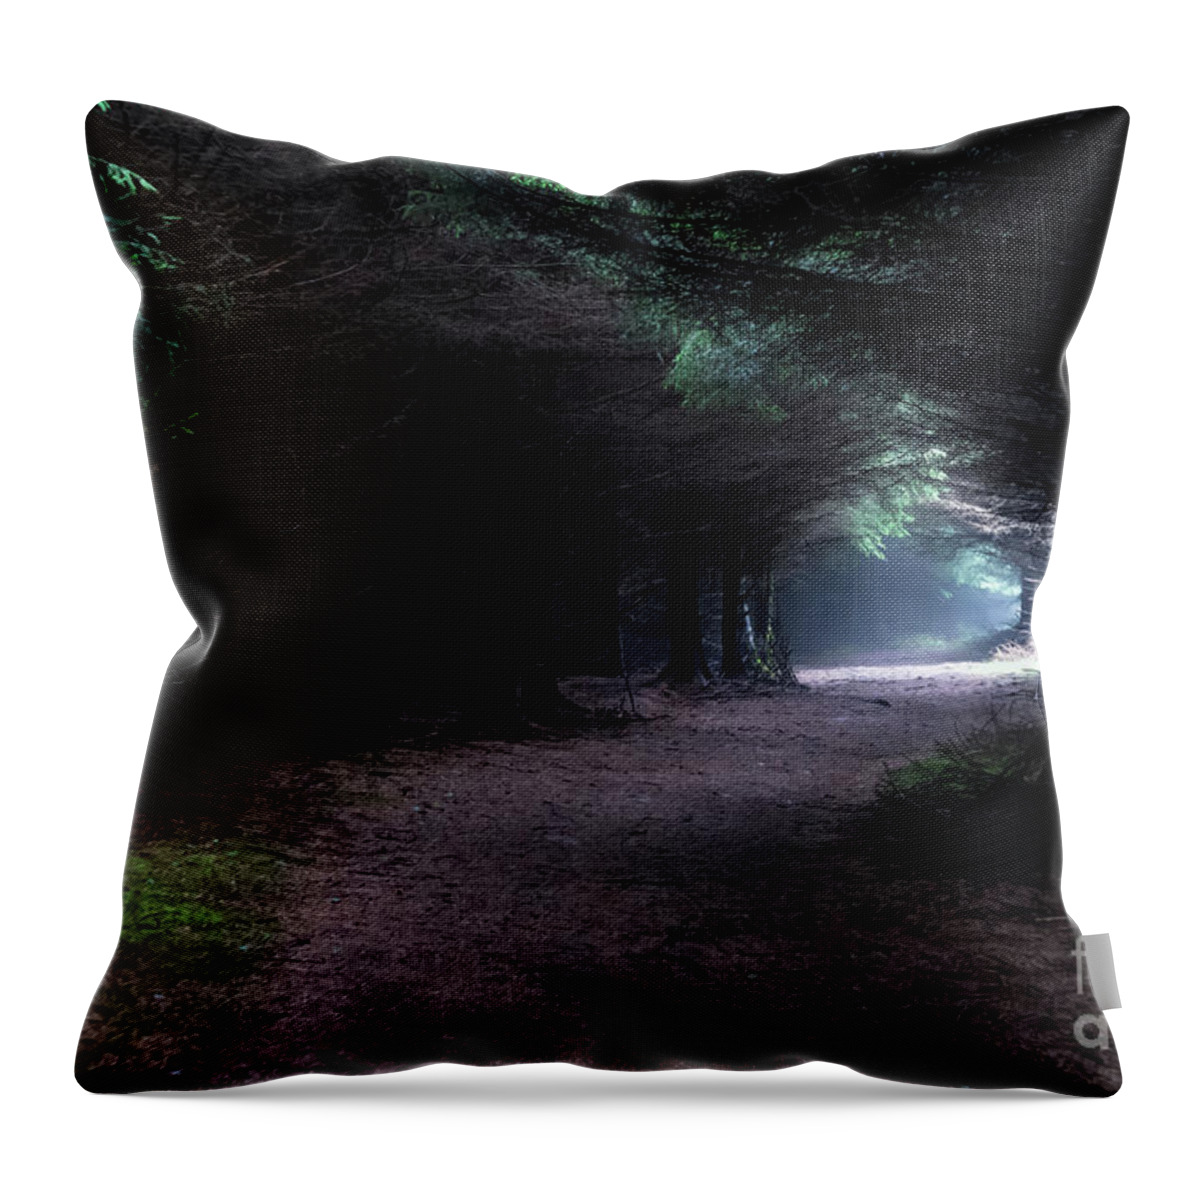 Wood Throw Pillow featuring the photograph Narrow Path Through Foggy Mysterious Forest by Andreas Berthold